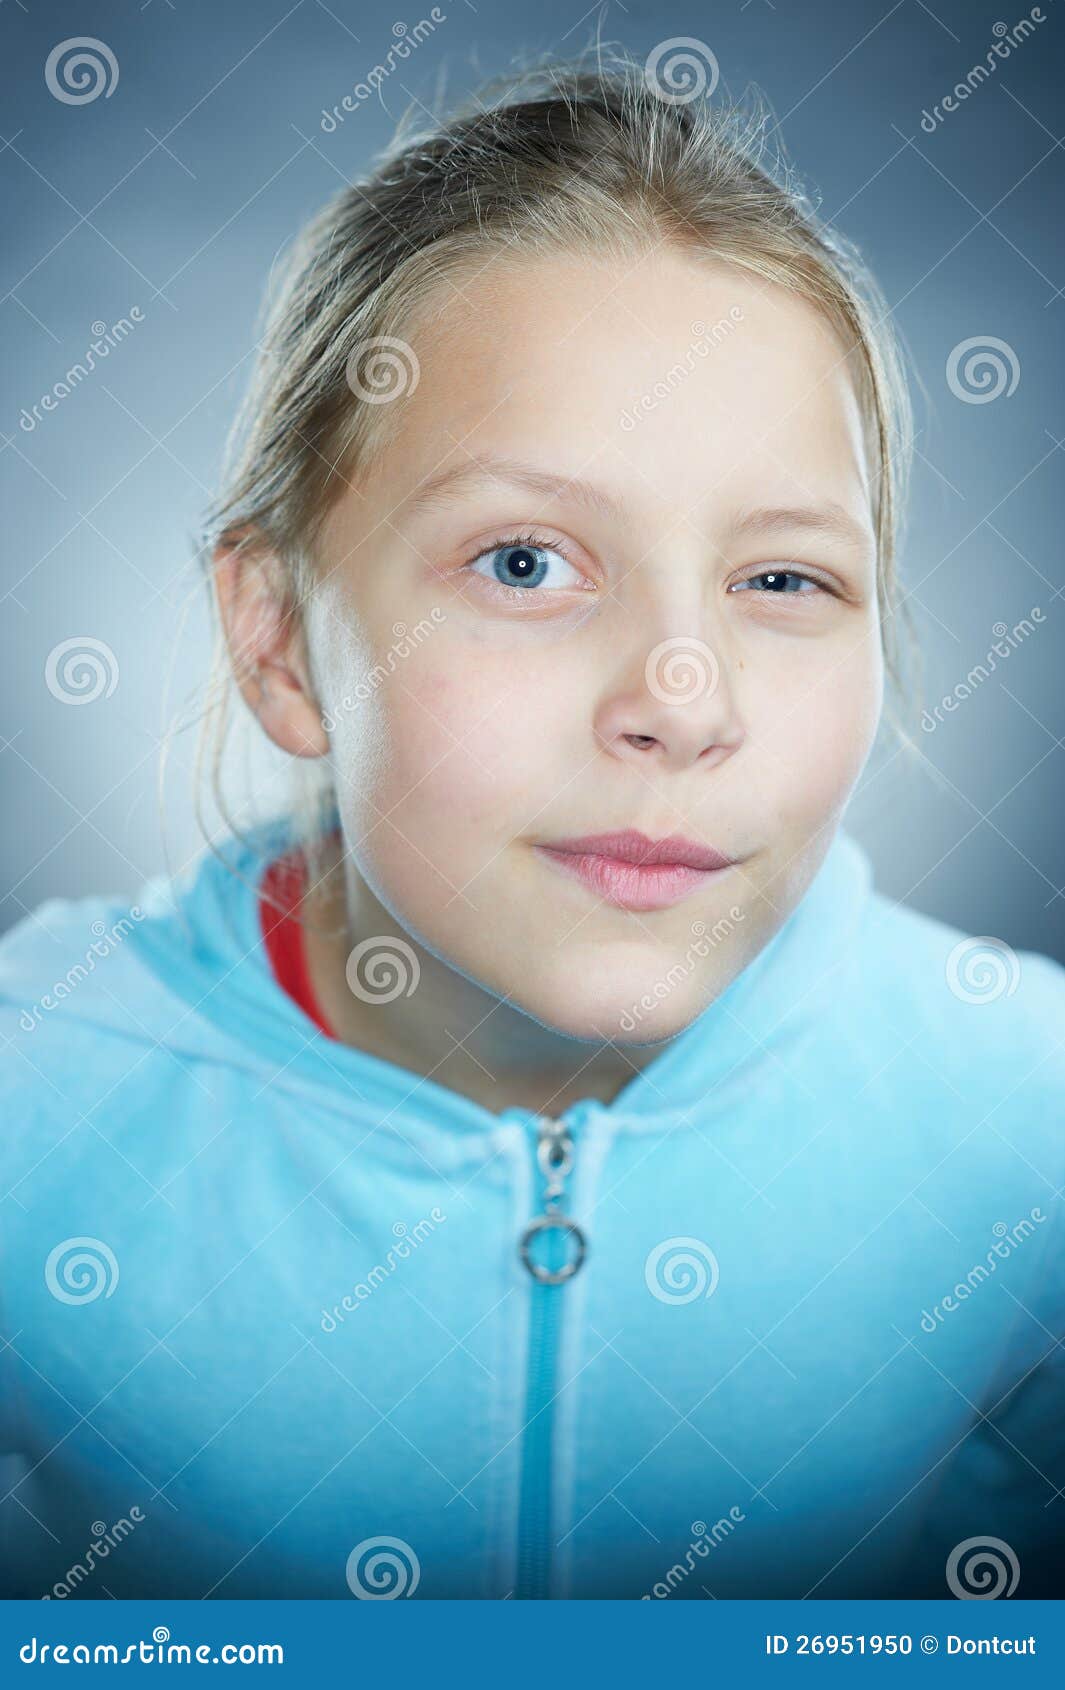 Atrractive Girl Making Faces Stock Photo - Image of american, carefree ...